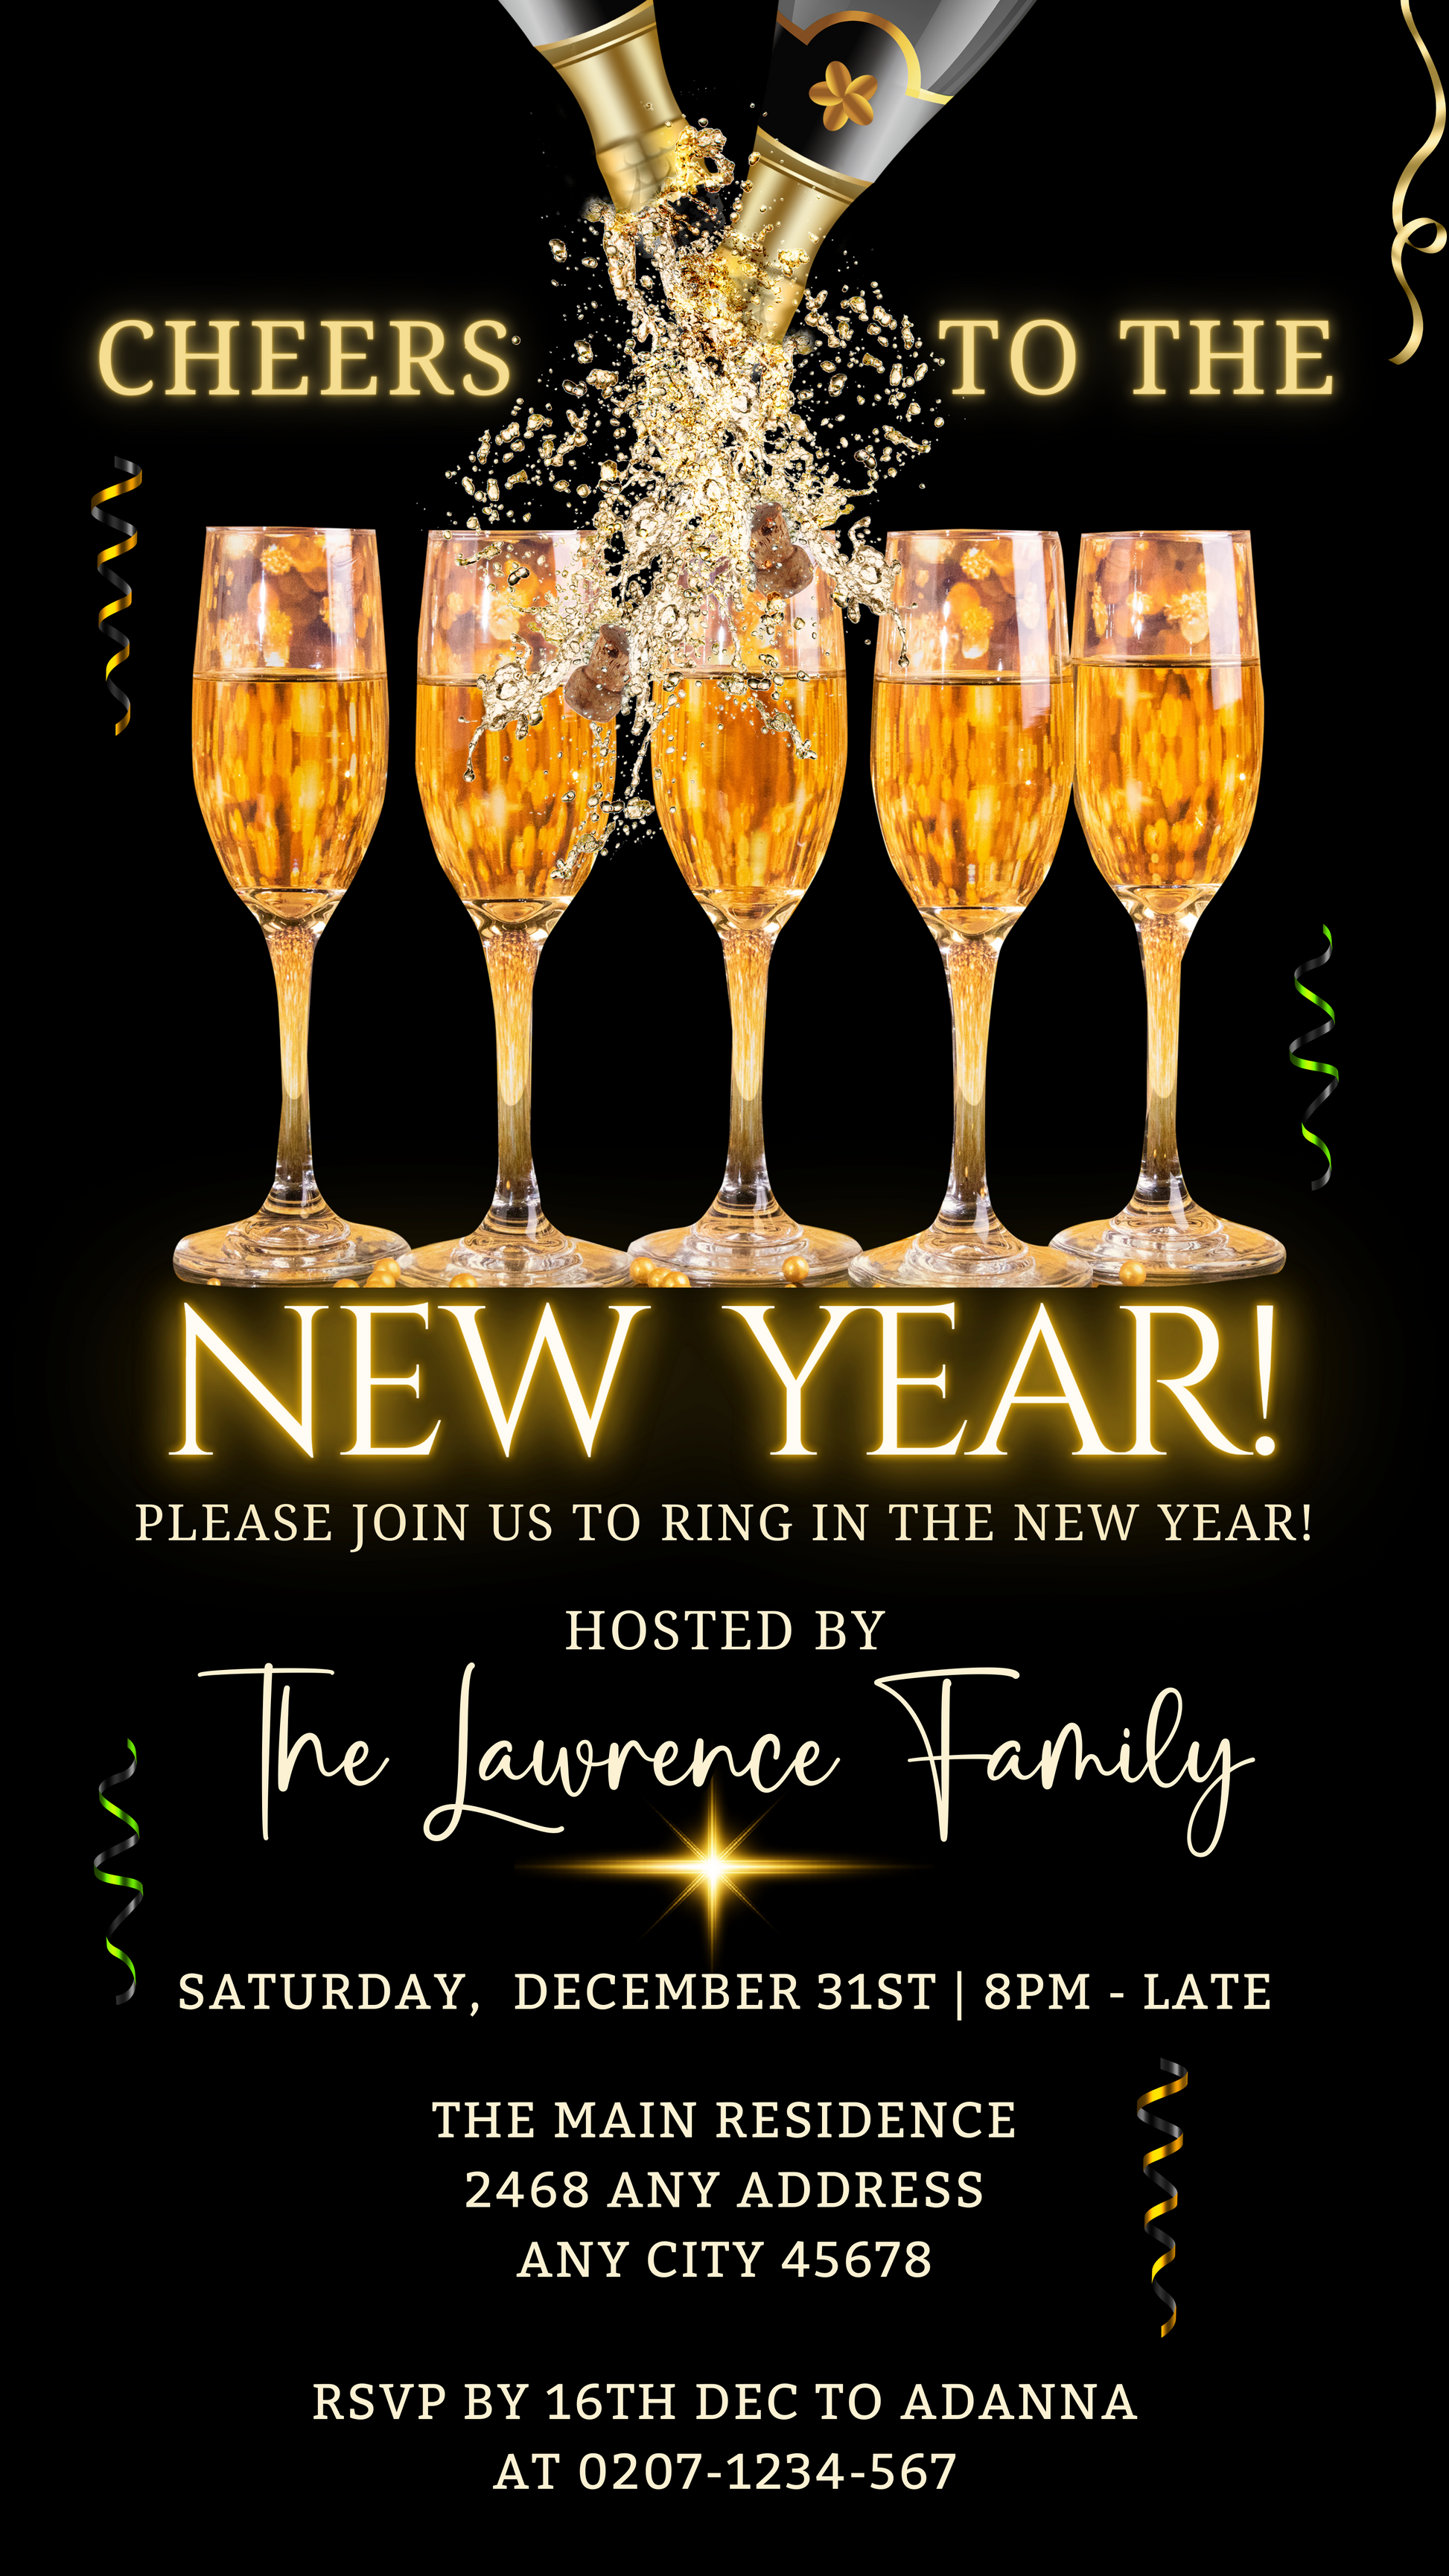 A digital invitation template featuring champagne glasses for a customizable New Year's party evite.